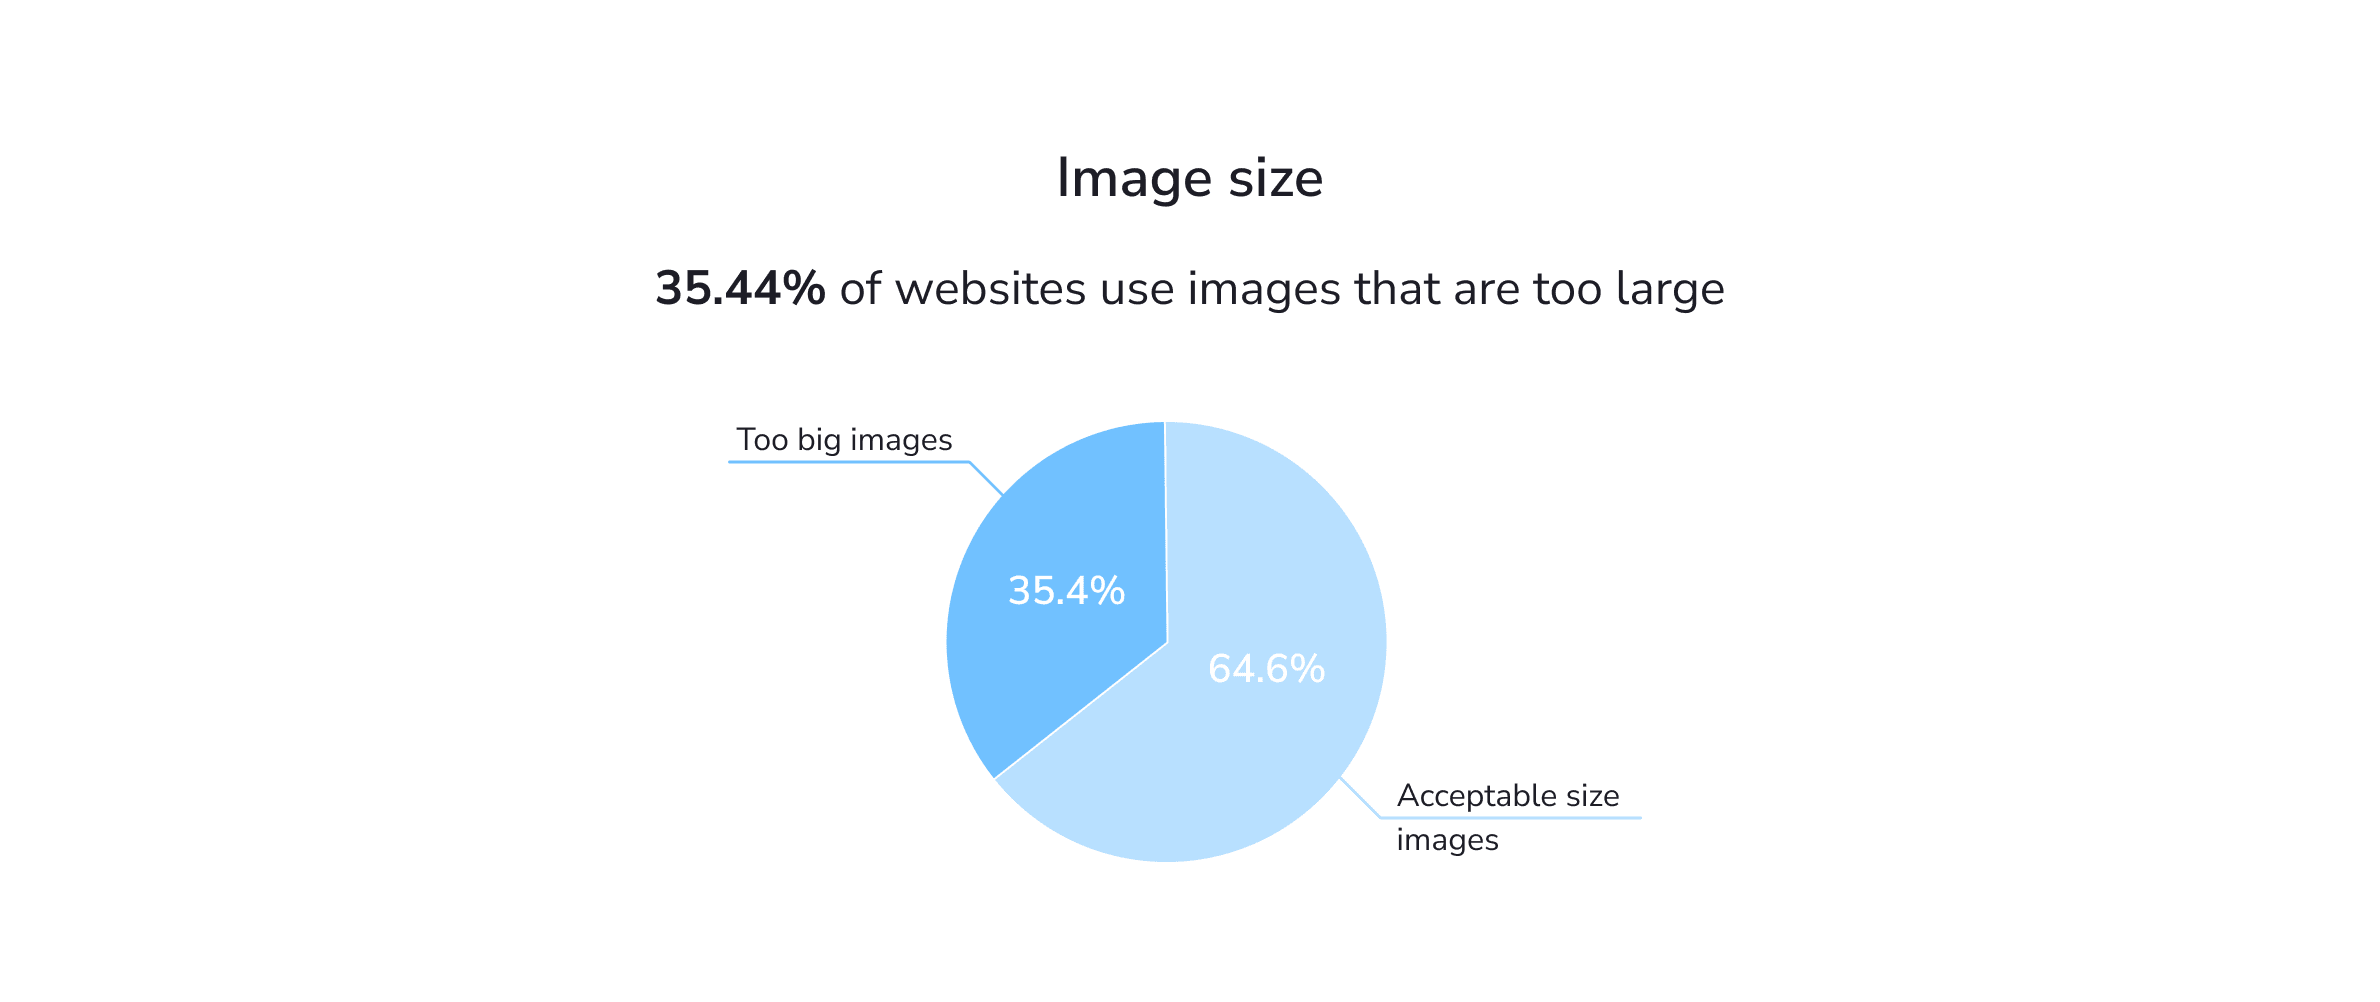 Image size issues